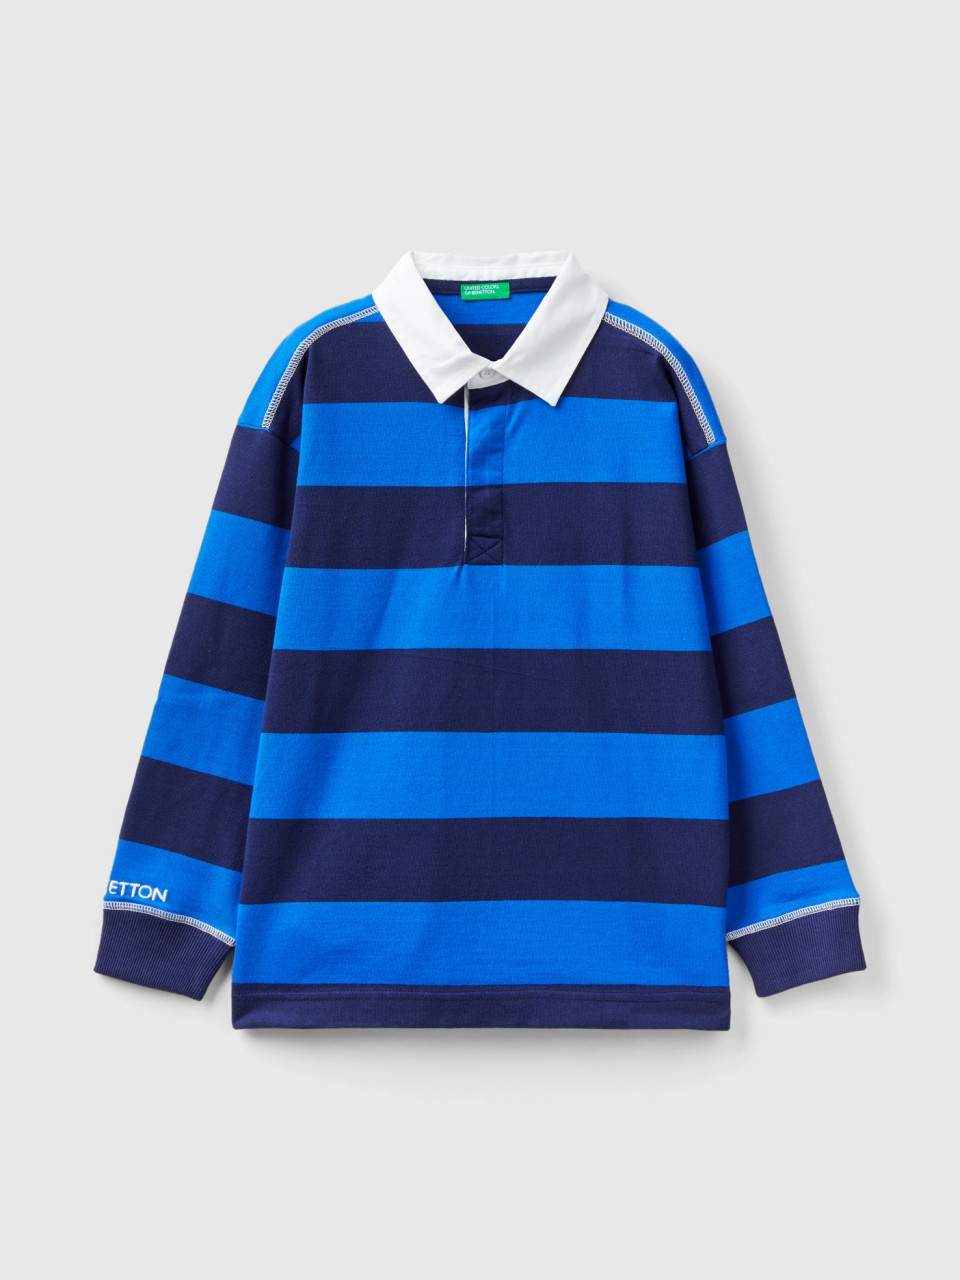 Benetton, Rugby Polo With Cornflower Blue And Dark Blue Stripes, Multi-color, Kids